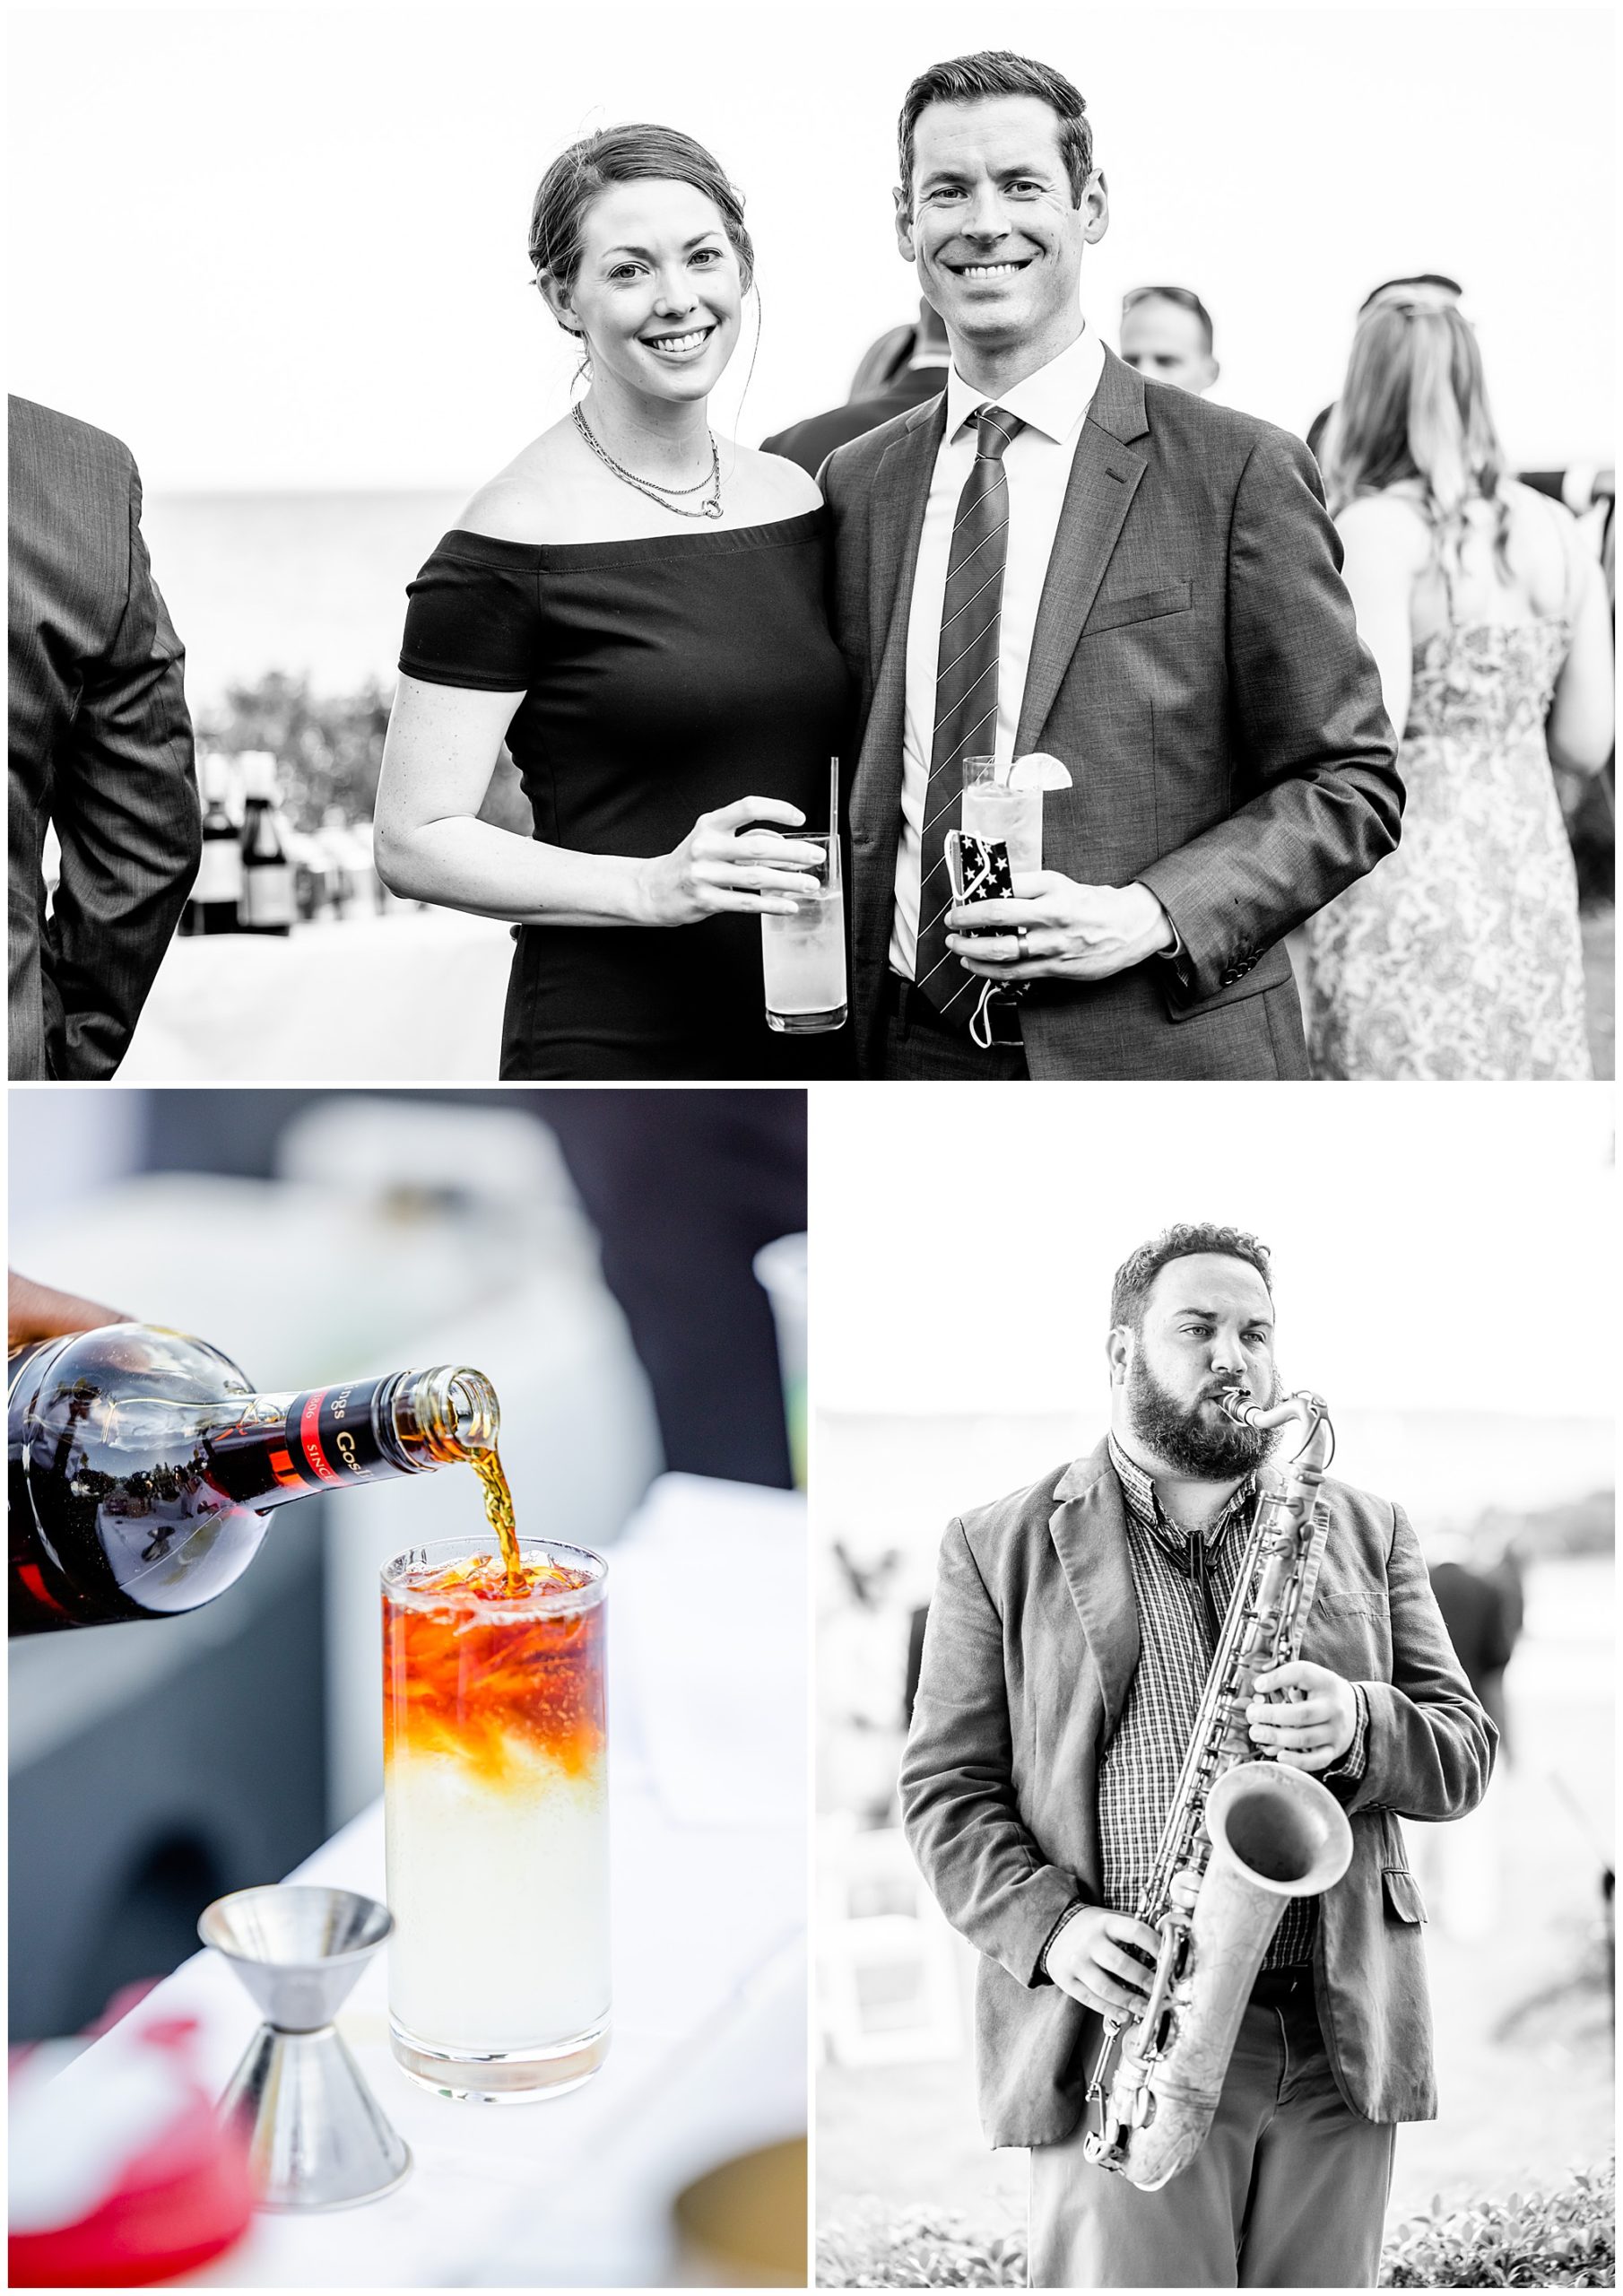 Nantucket inspired Gibson Island Club wedding, nautical wedding inspiration, Annapolitan wedding inspiration, Gibson Island Club wedding photography, Gibson Island Club wedding photographer, Annapolis wedding photographer, Baltimore wedding photographer, Maryland wedding photographer, nautical aesthetic, Annapolis wedding inspiration, Rachel E.H. Photography, Bachelor Boys, saxophone player, drink being poured, black and white, wedding guests